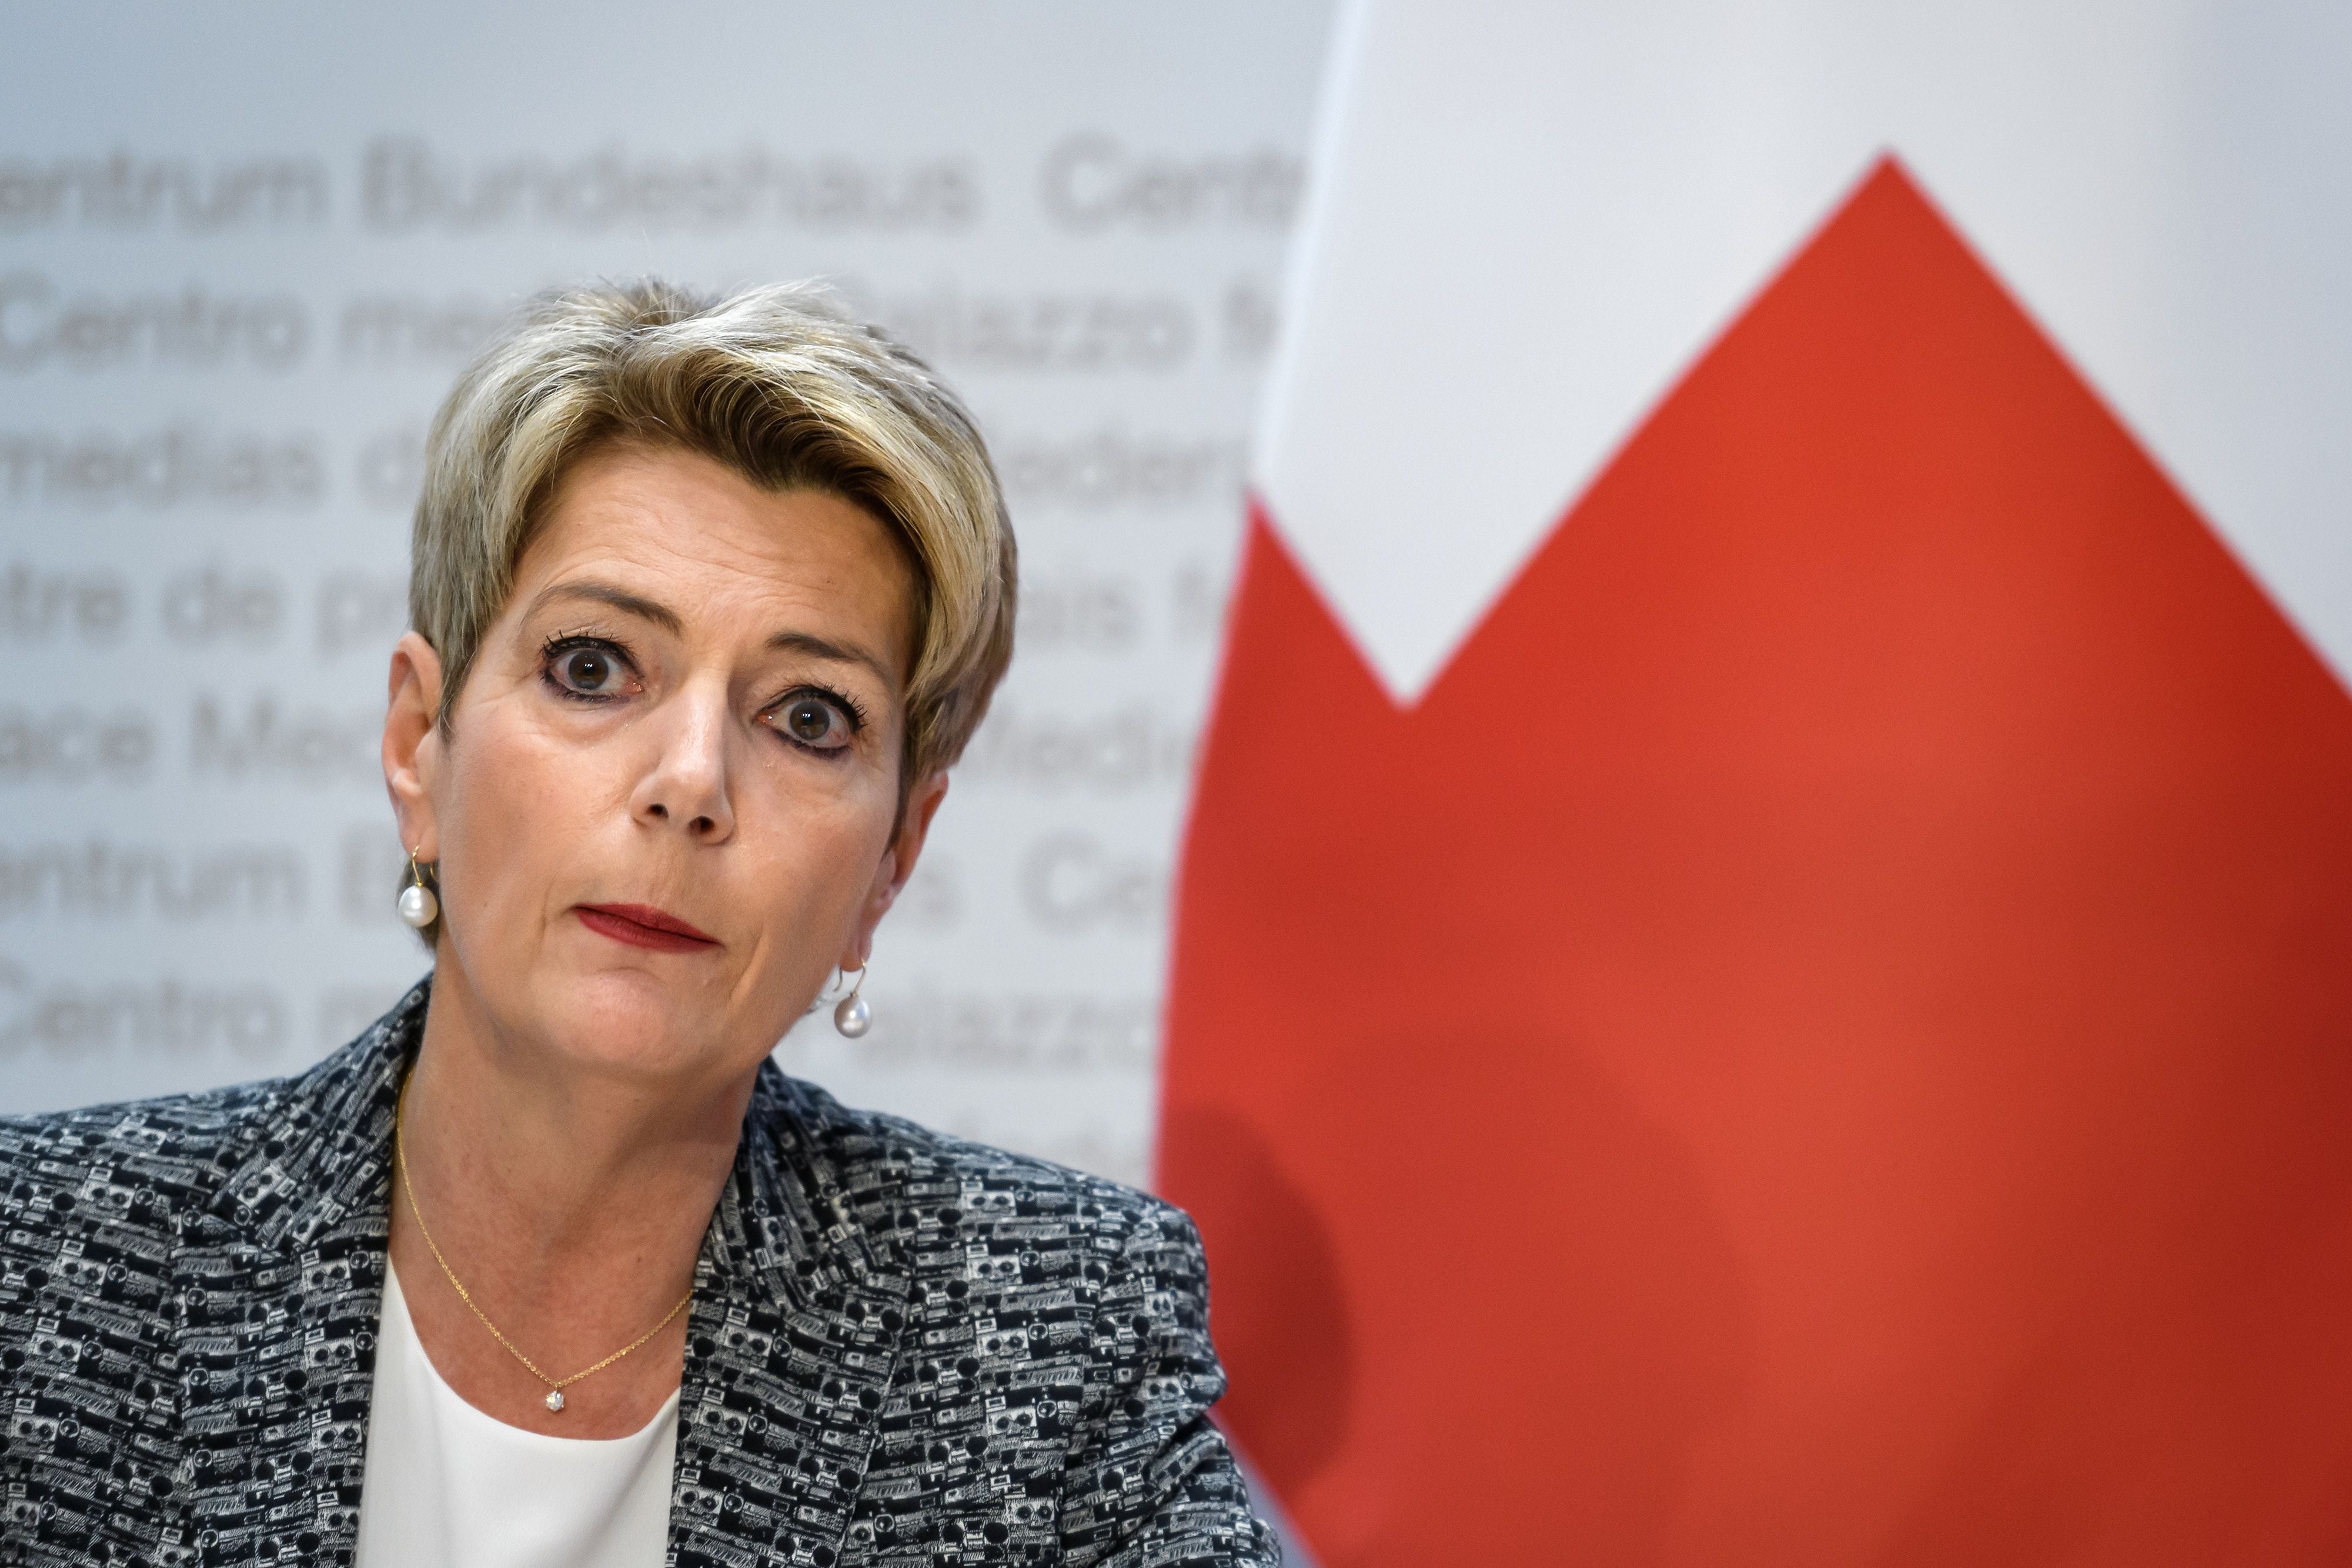 Karin Keller-Sutter, the Swiss finance minister, said that ‘Money laundering harms the economy and jeopardises confidence in the financial system’